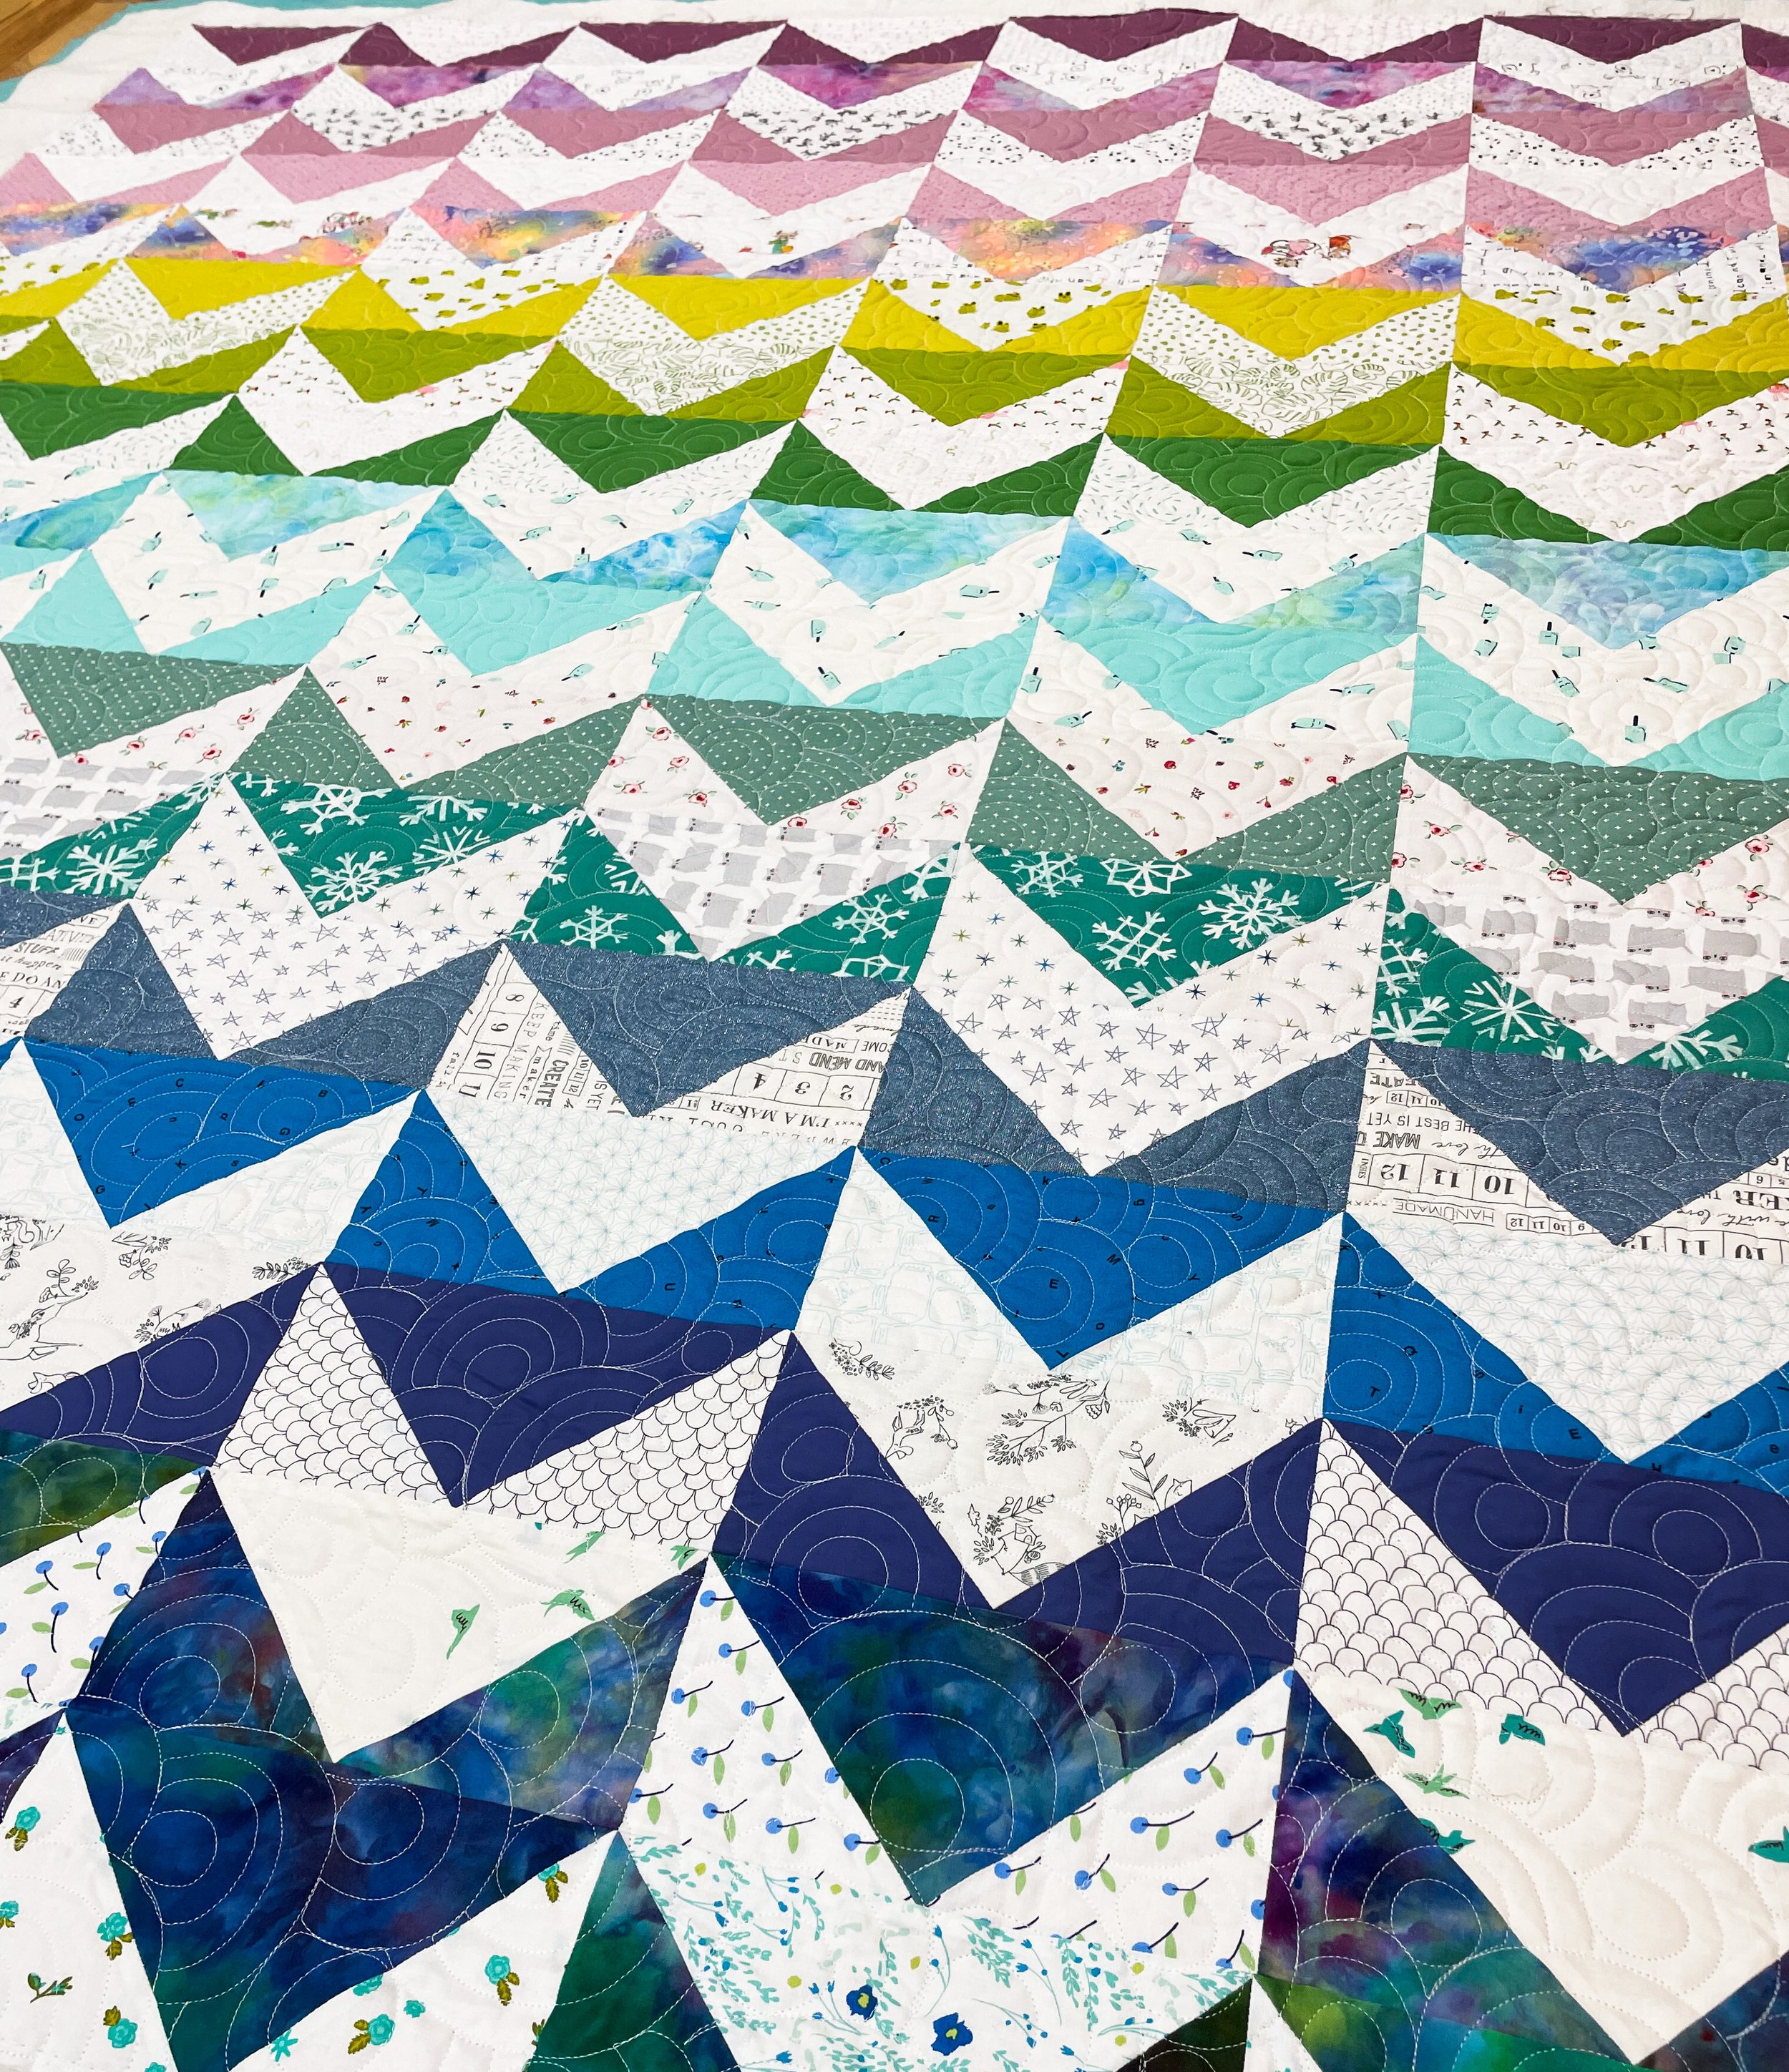 Meesh's Stockinette Quilt, Take 2 — Hello, my name is Quilt